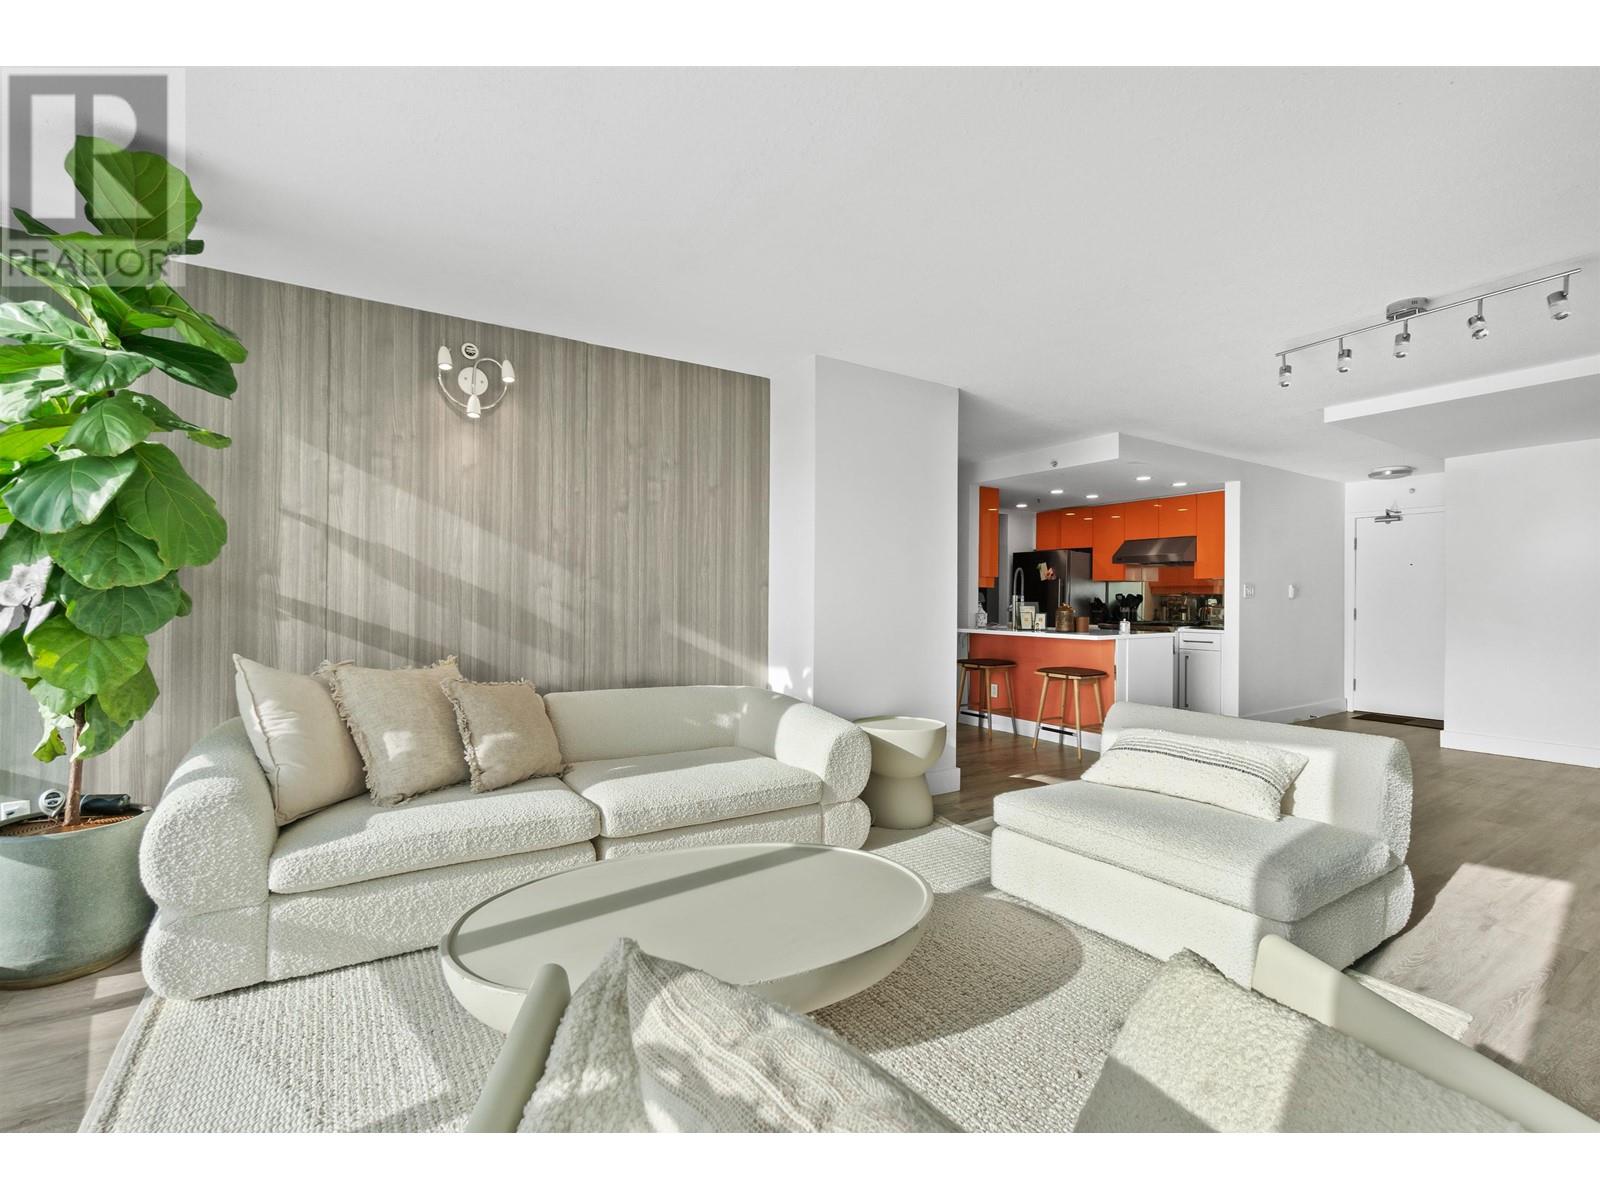 Listing Picture 2 of 33 : 508 1408 STRATHMORE MEWS, Vancouver / 溫哥華 - 魯藝地產 Yvonne Lu Group - MLS Medallion Club Member